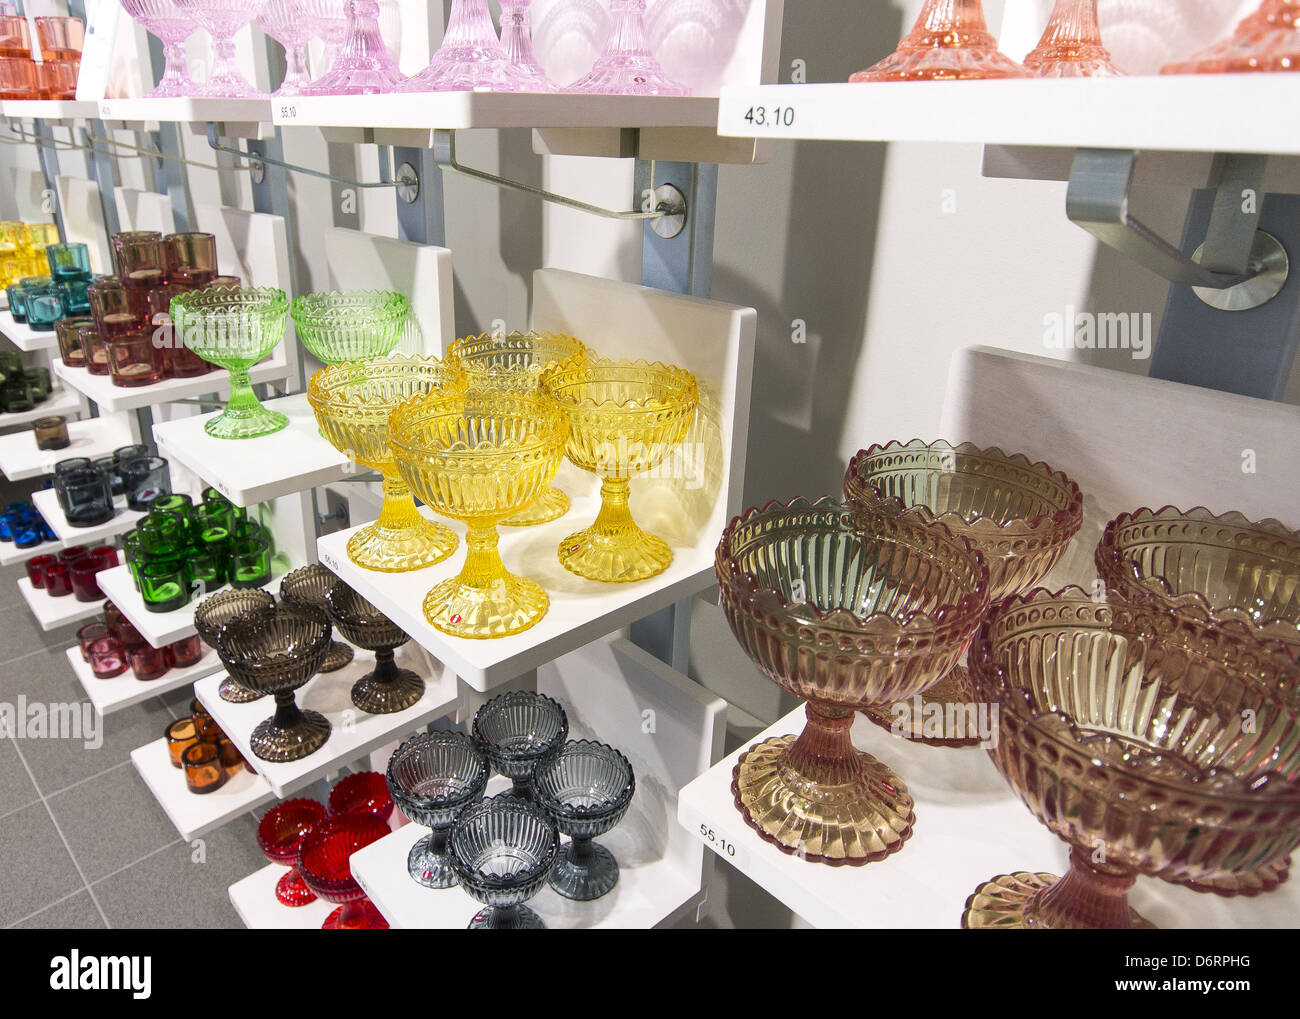 Display of glassware in the Iittala outlet store at the Arabia ...